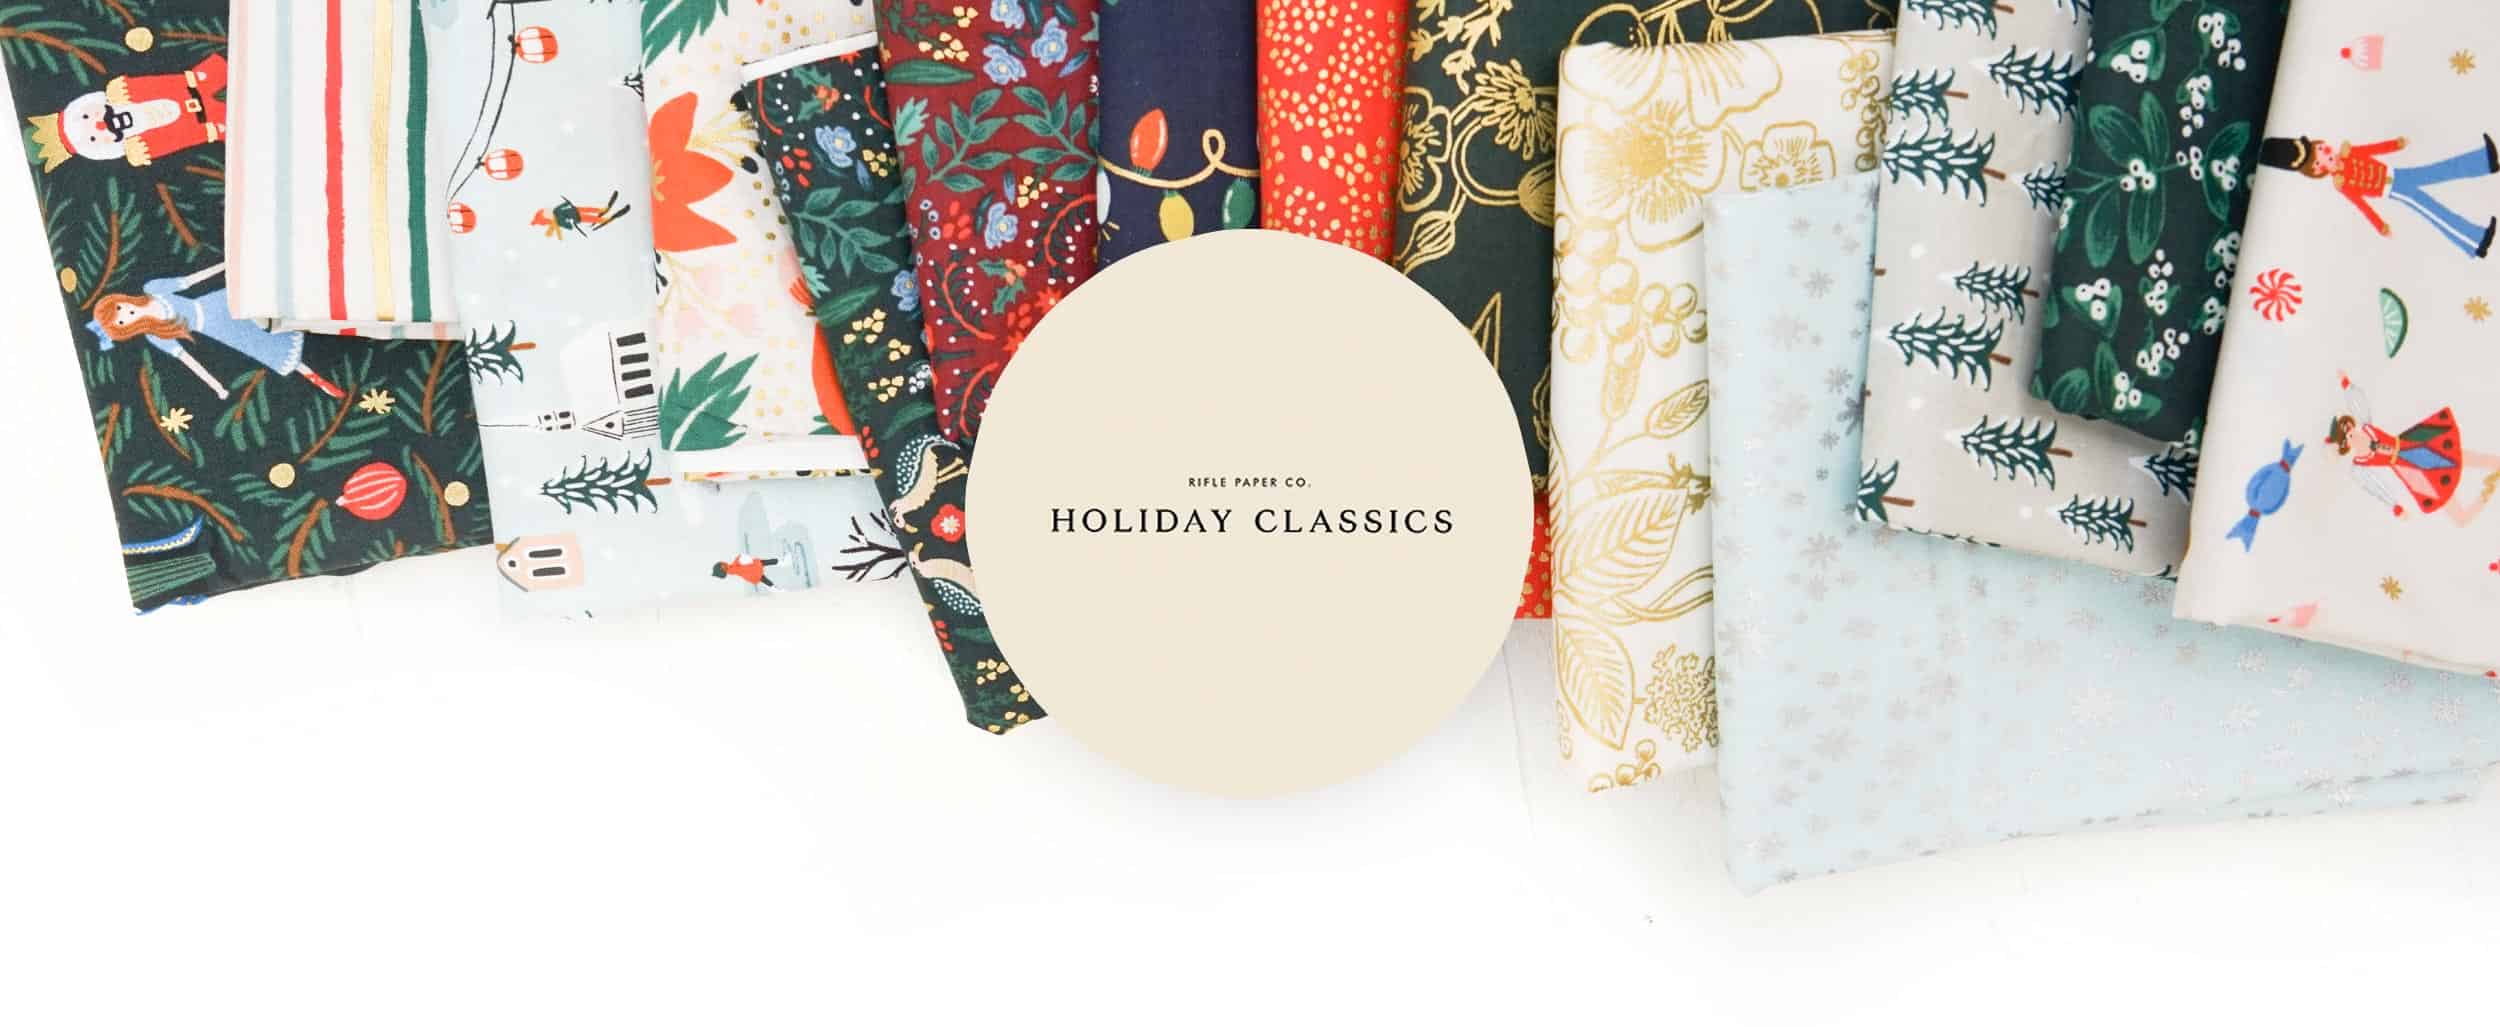 holiday-classics-fabric-by-rifle-paper-co-header2